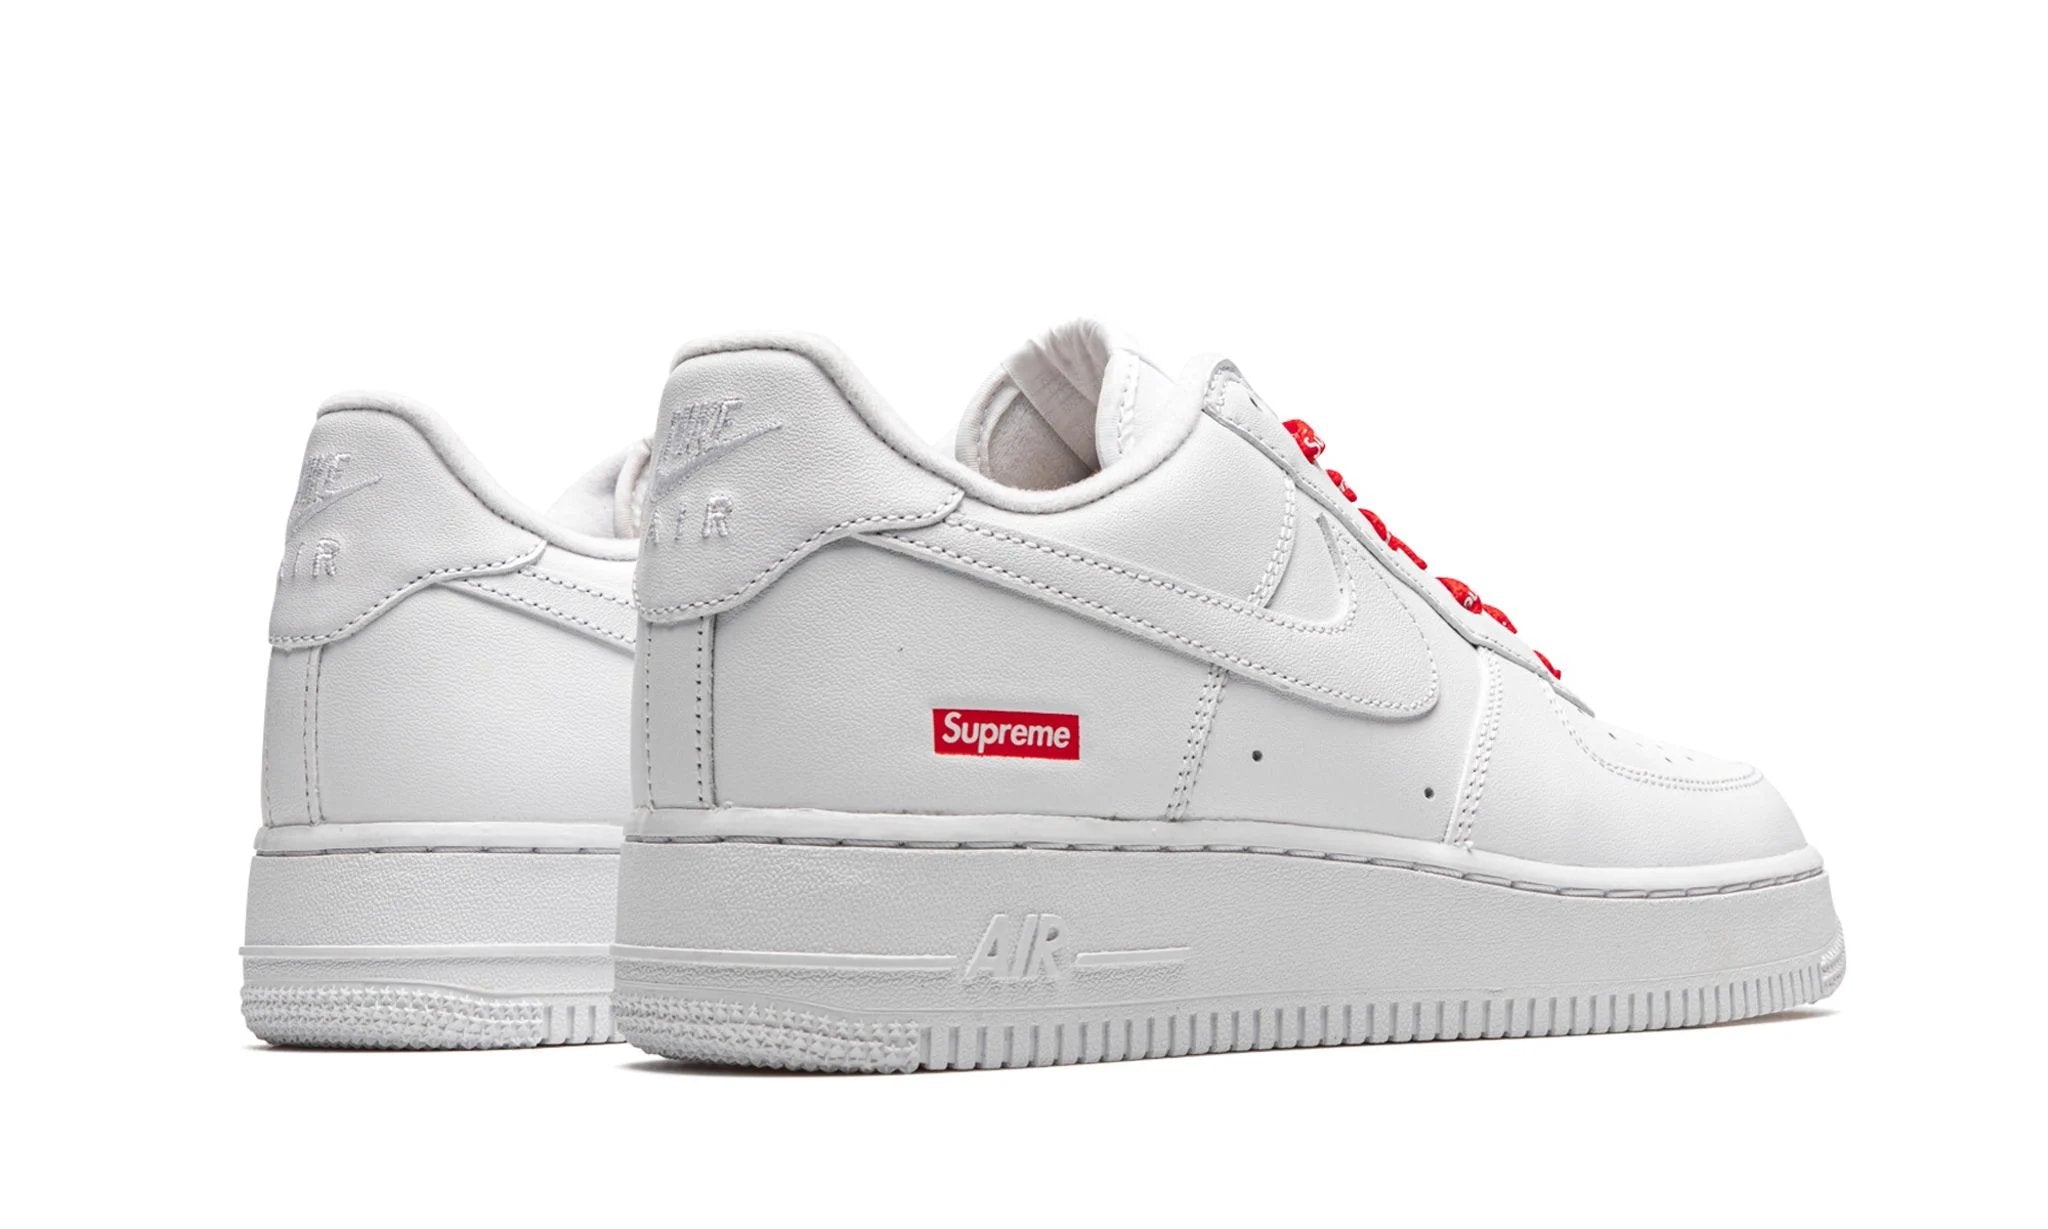 Nike Air Force 1 Low Supreme White - CU9225-100 - Sneakers